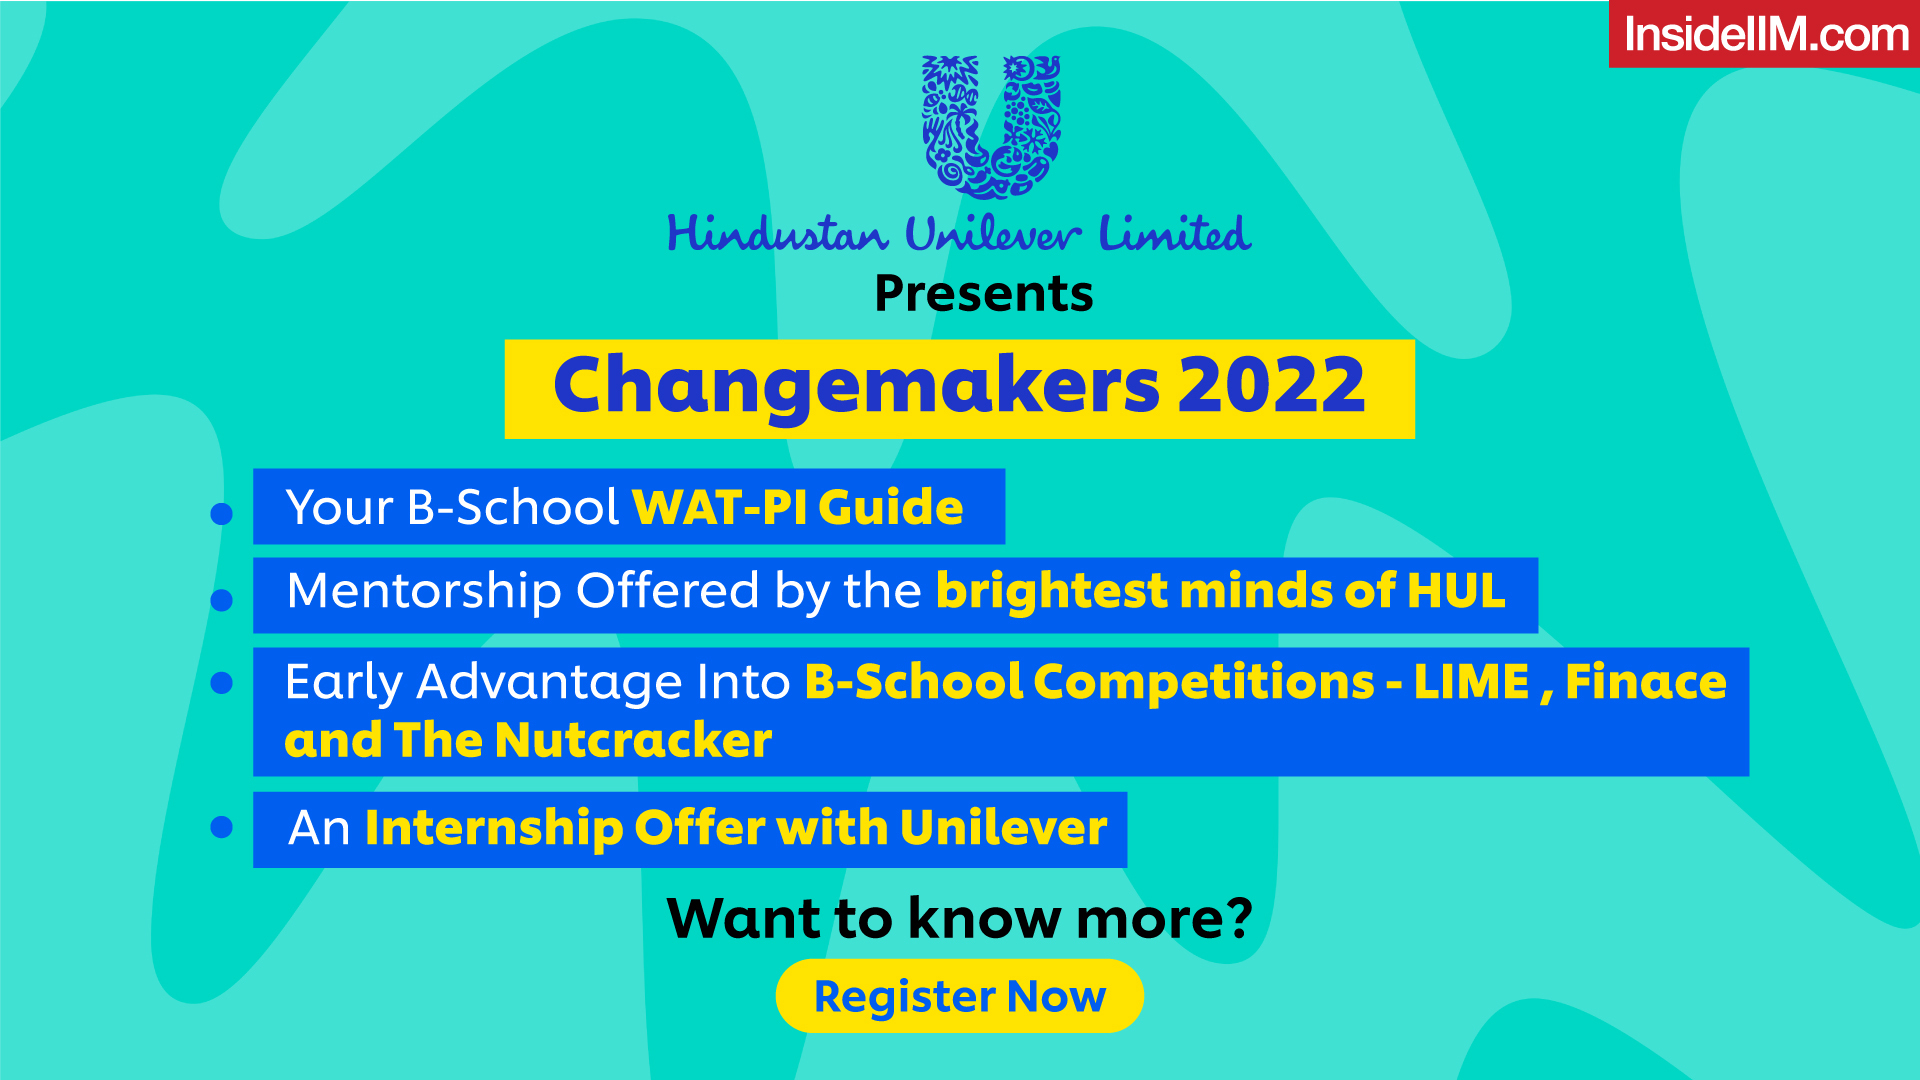 HUL Changemakers 2022 - Register Now!